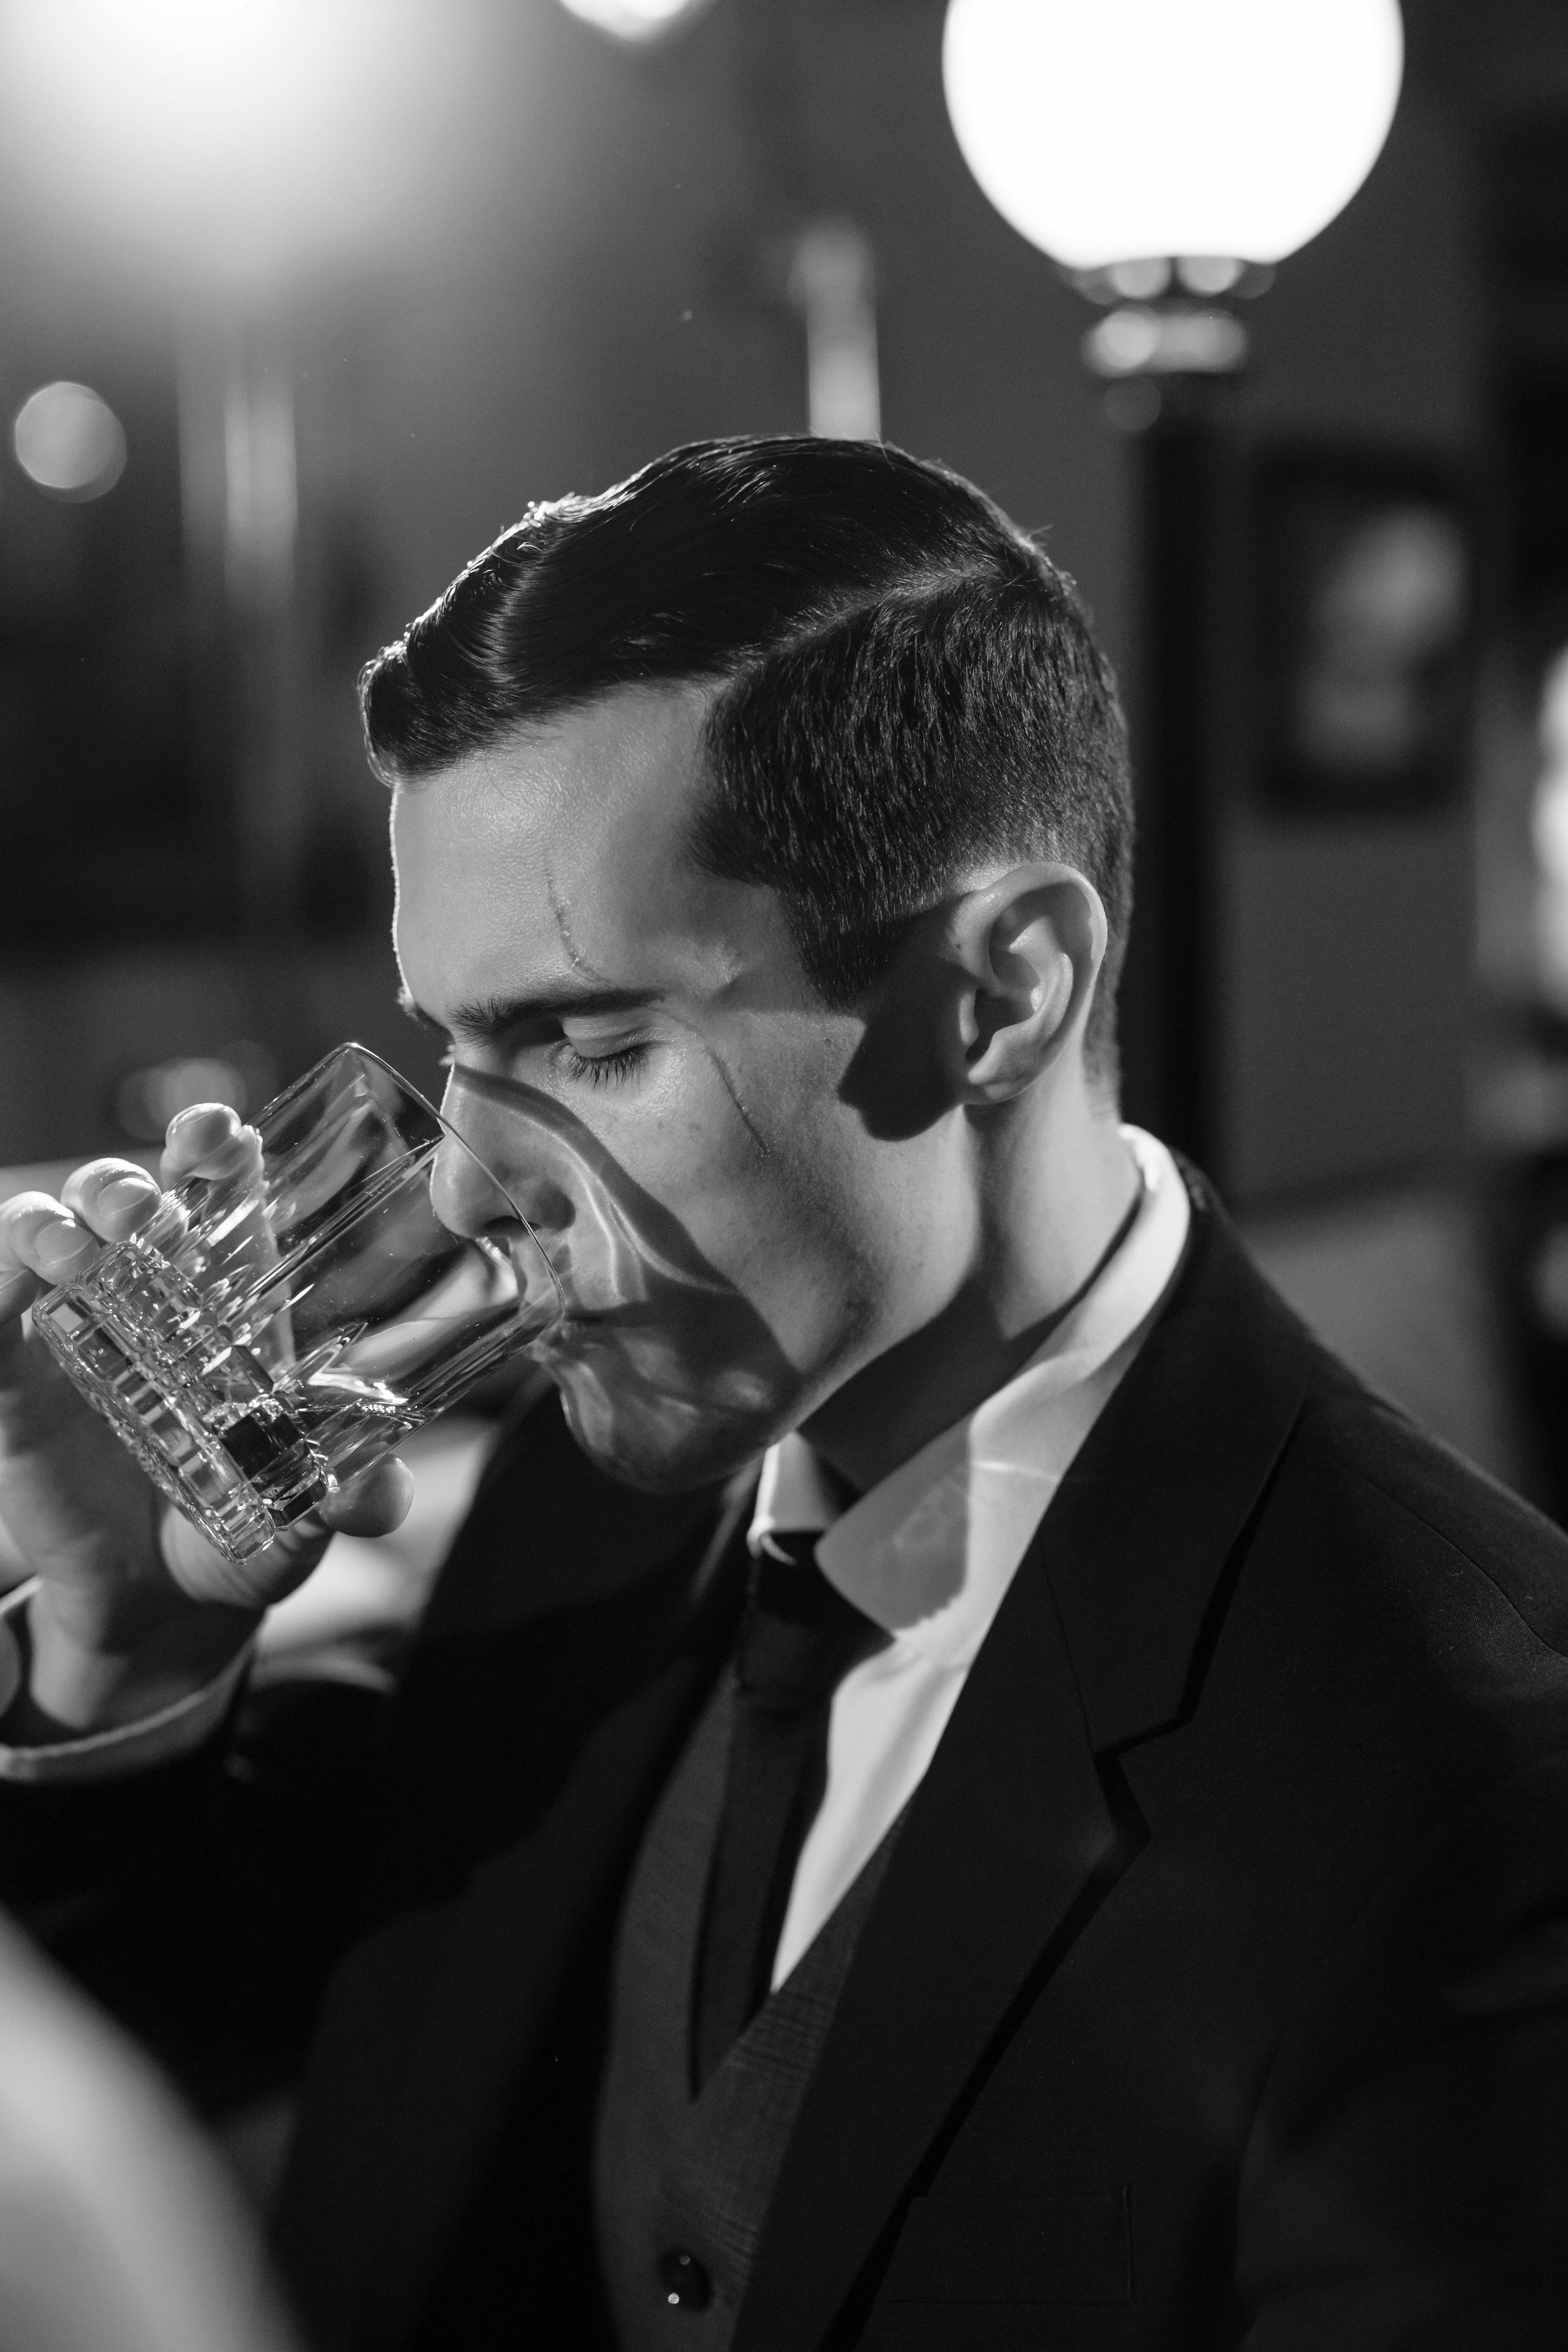 A man drinking a beverage | Source: Pexels